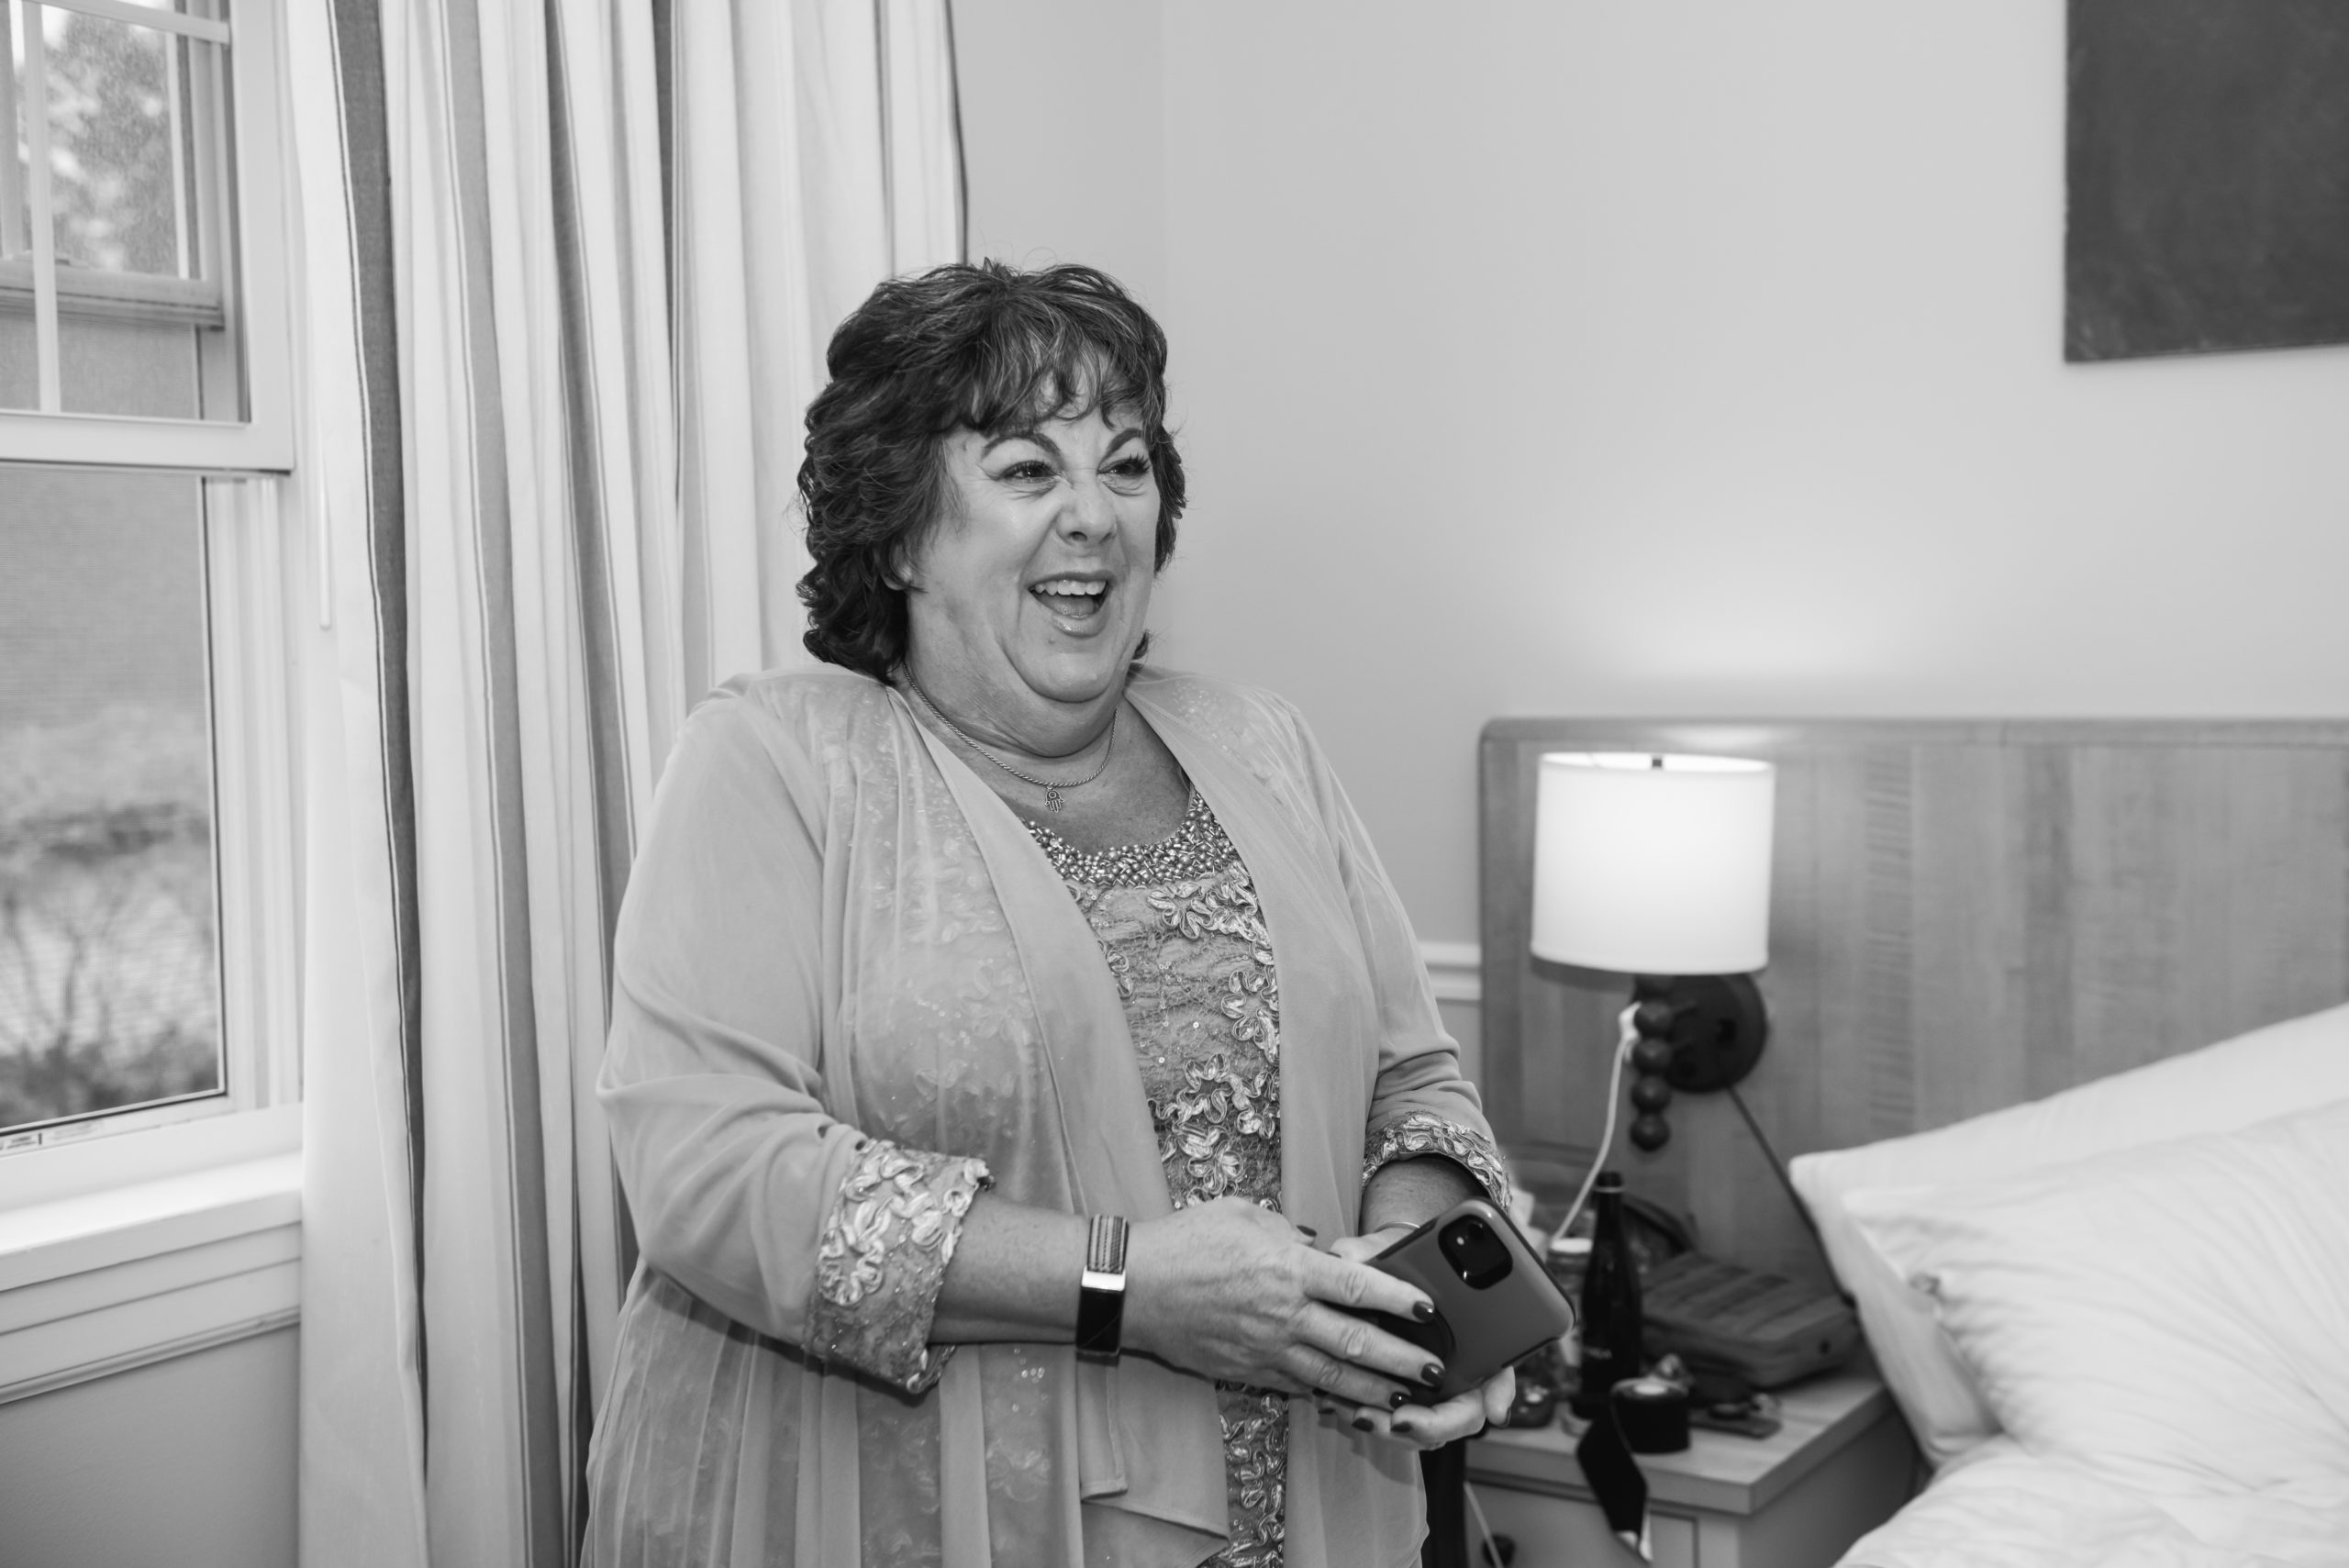 Black and white photograph of the mother of the bride smiling open-mouthed looking straight ahead, off camera. She is dressed for the wedding. She is standing in a hotel room.